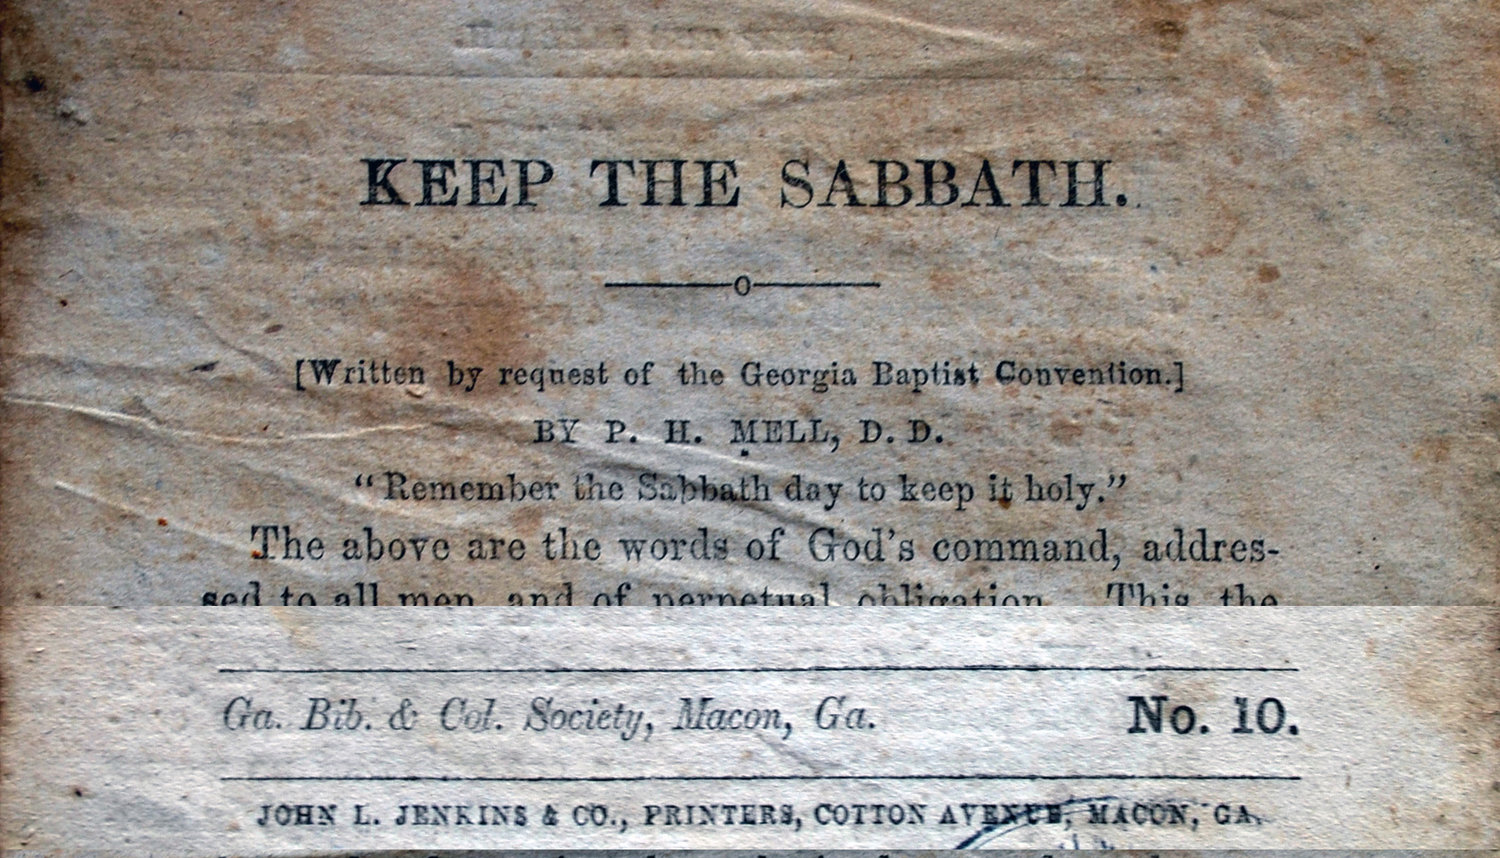 "Keep the Sabbath" was number 10 in a series of 24 tracts for soldiers published by the Georgia Baptist Bible and Colporteur Society during the Civil War. (Photo/UGA Special Collections Library)